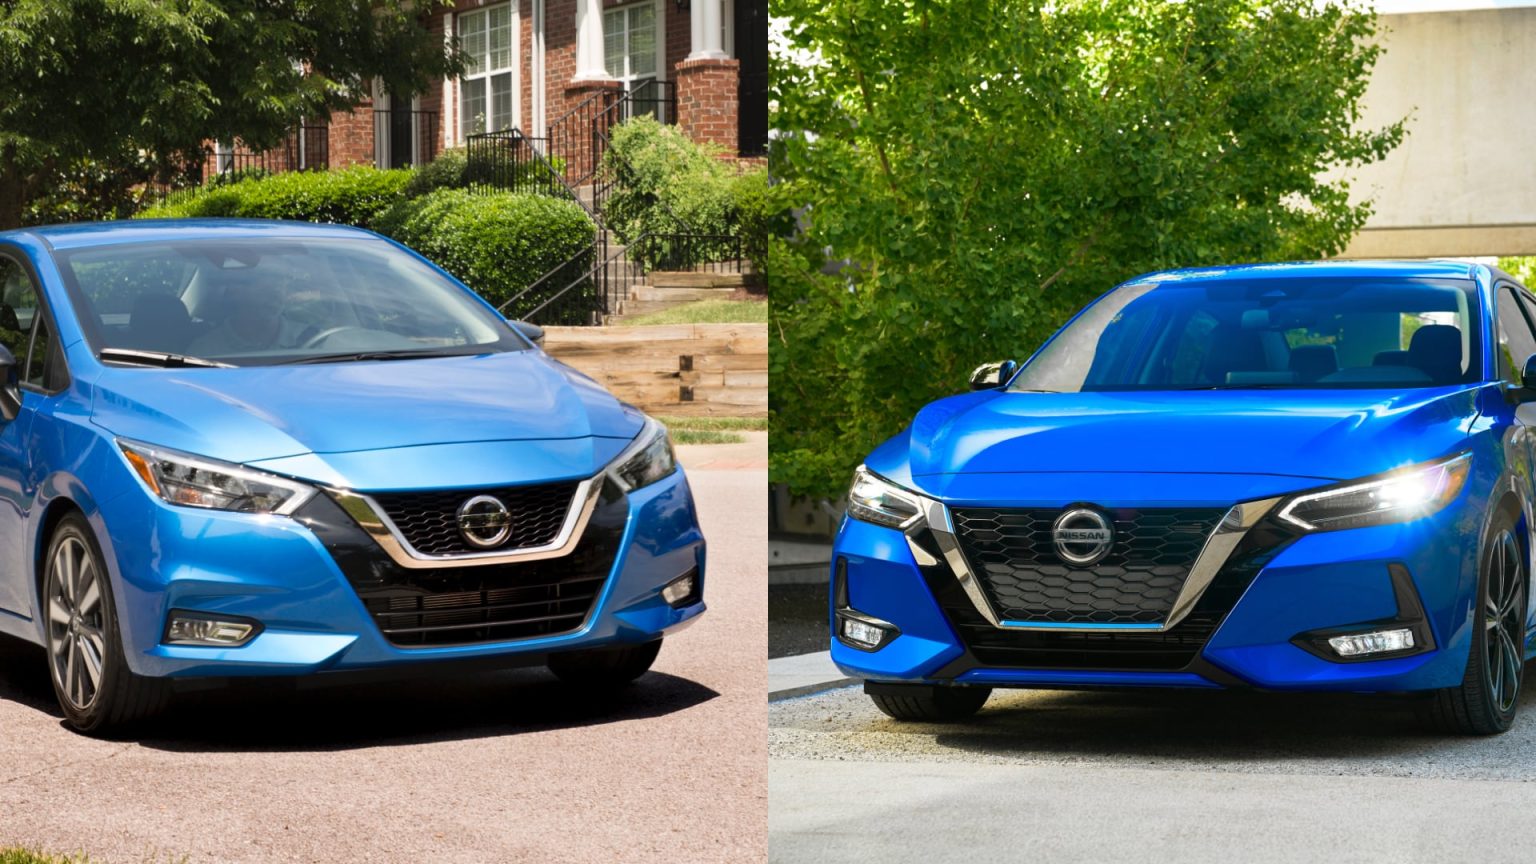 Nissan Versa vs Sentra What's The Difference? Motorborne